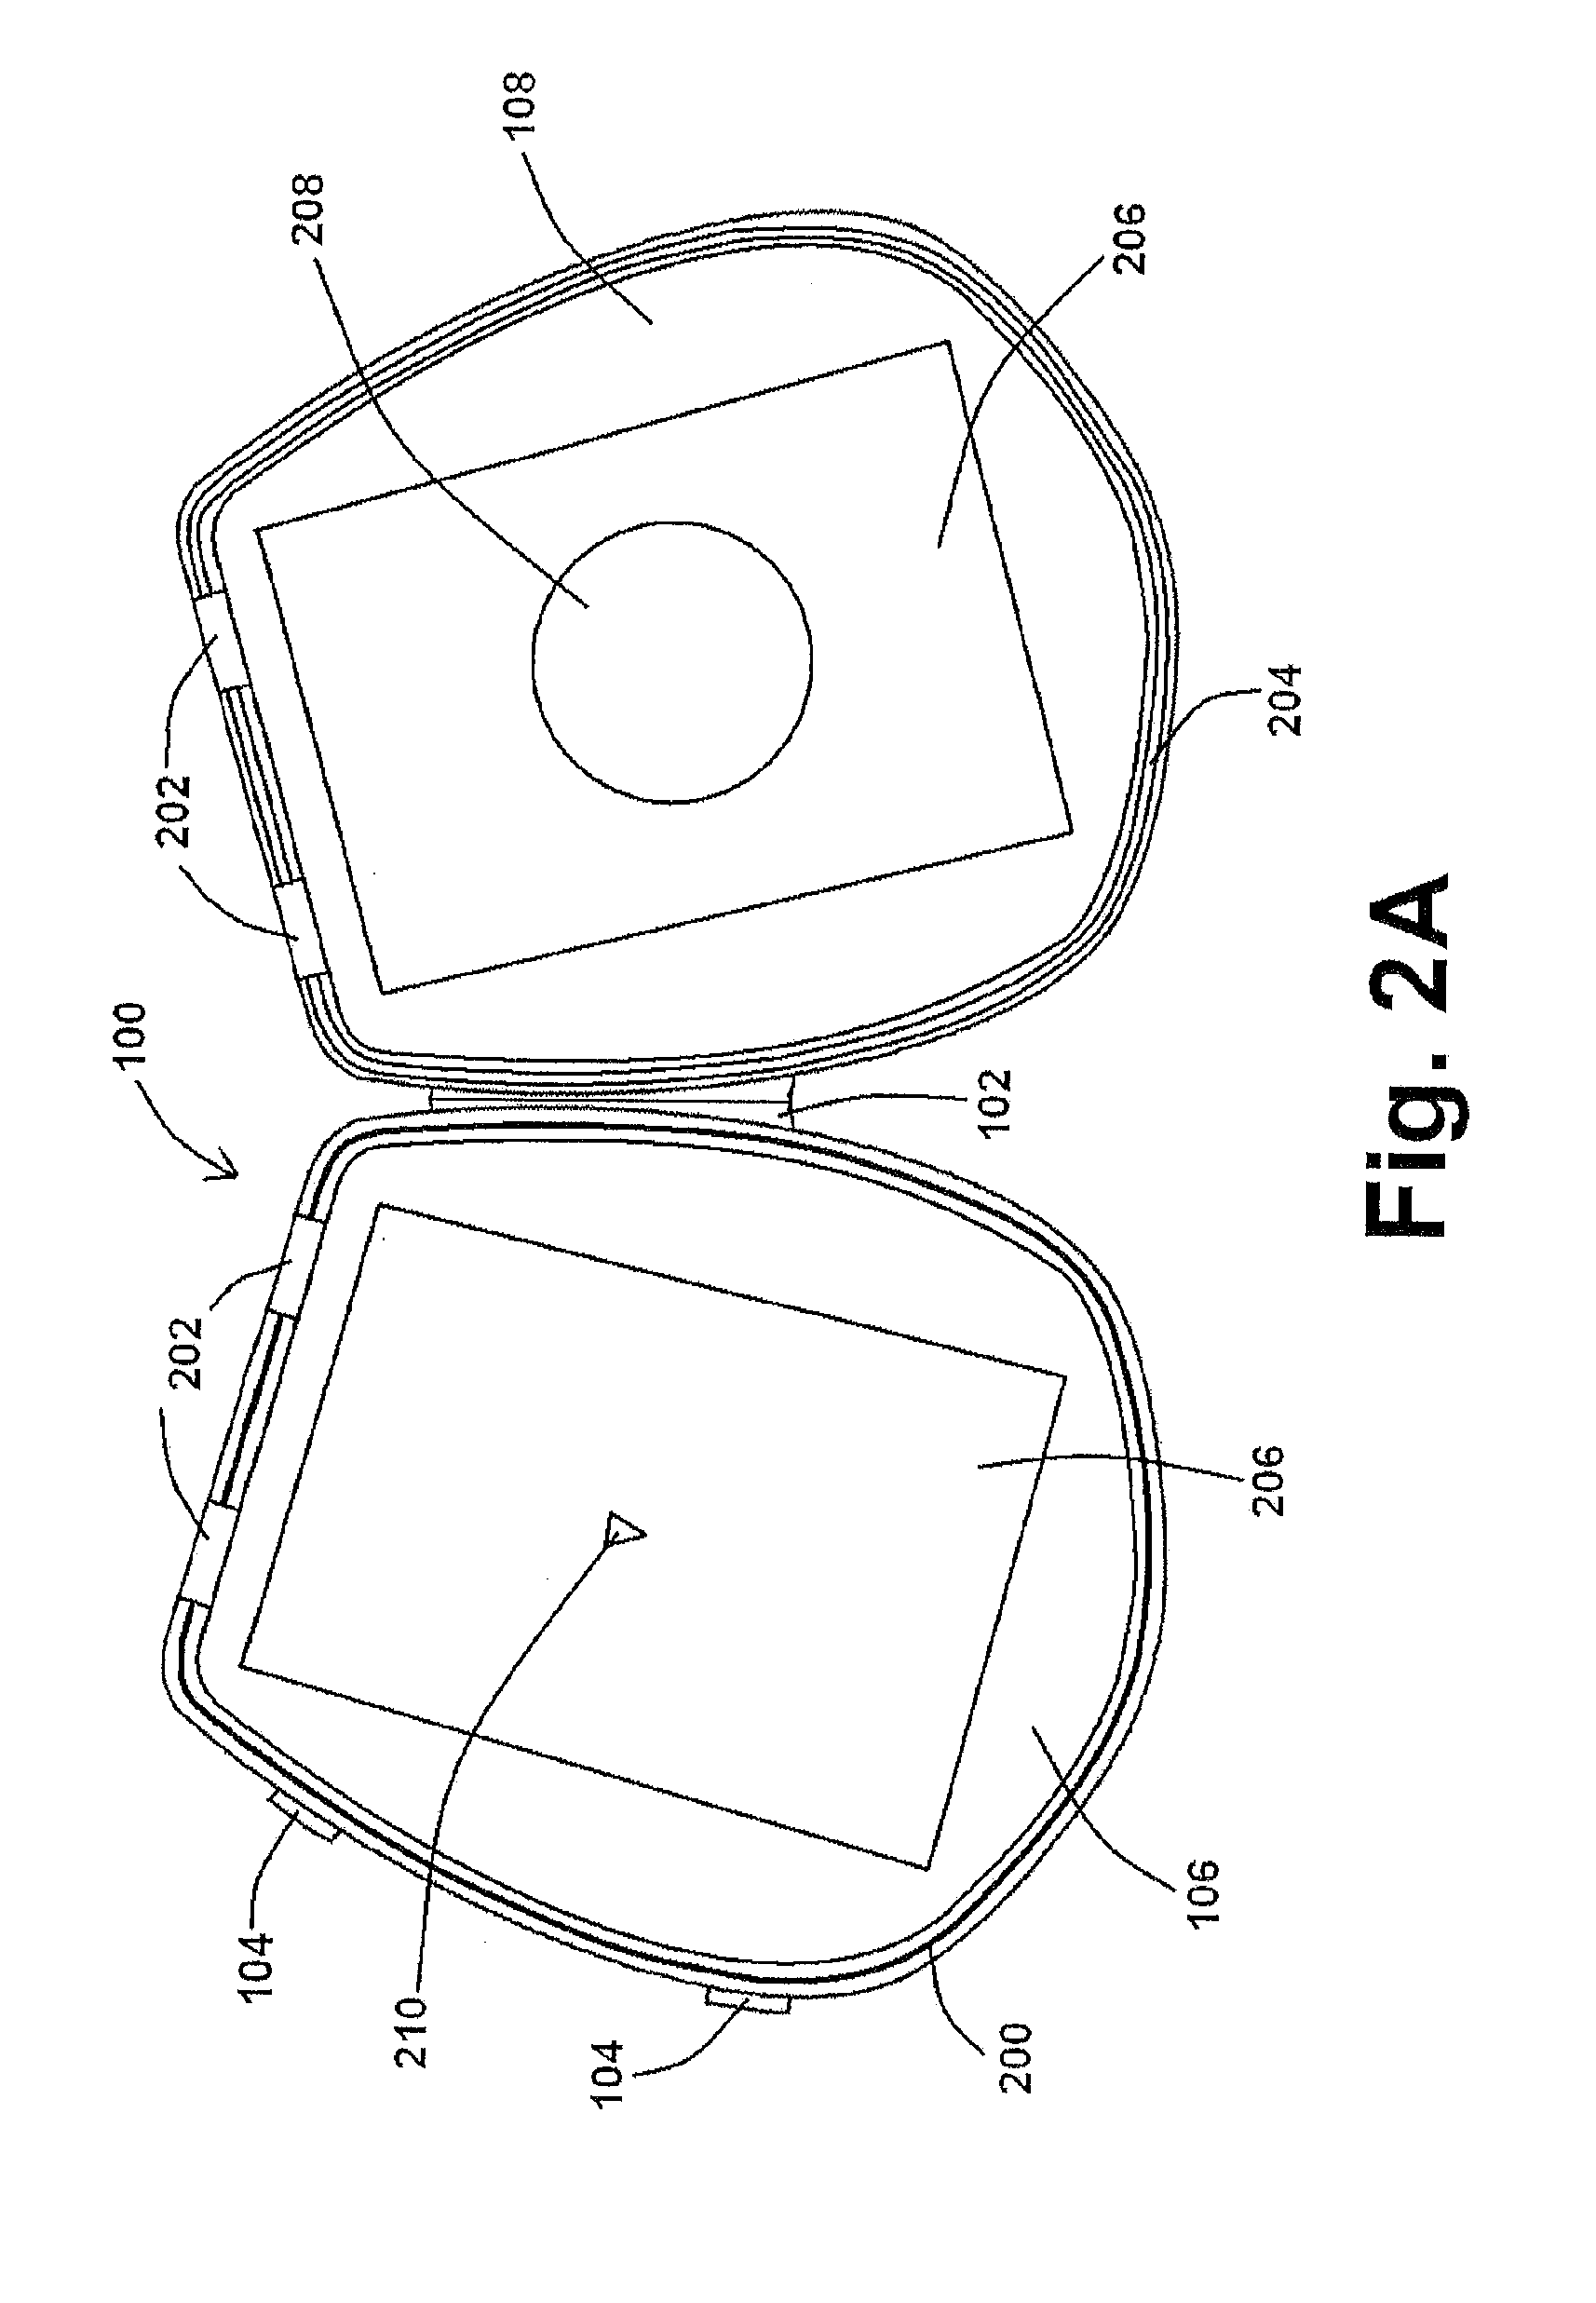 Devices and methods for maintaining an aseptic catheter environment